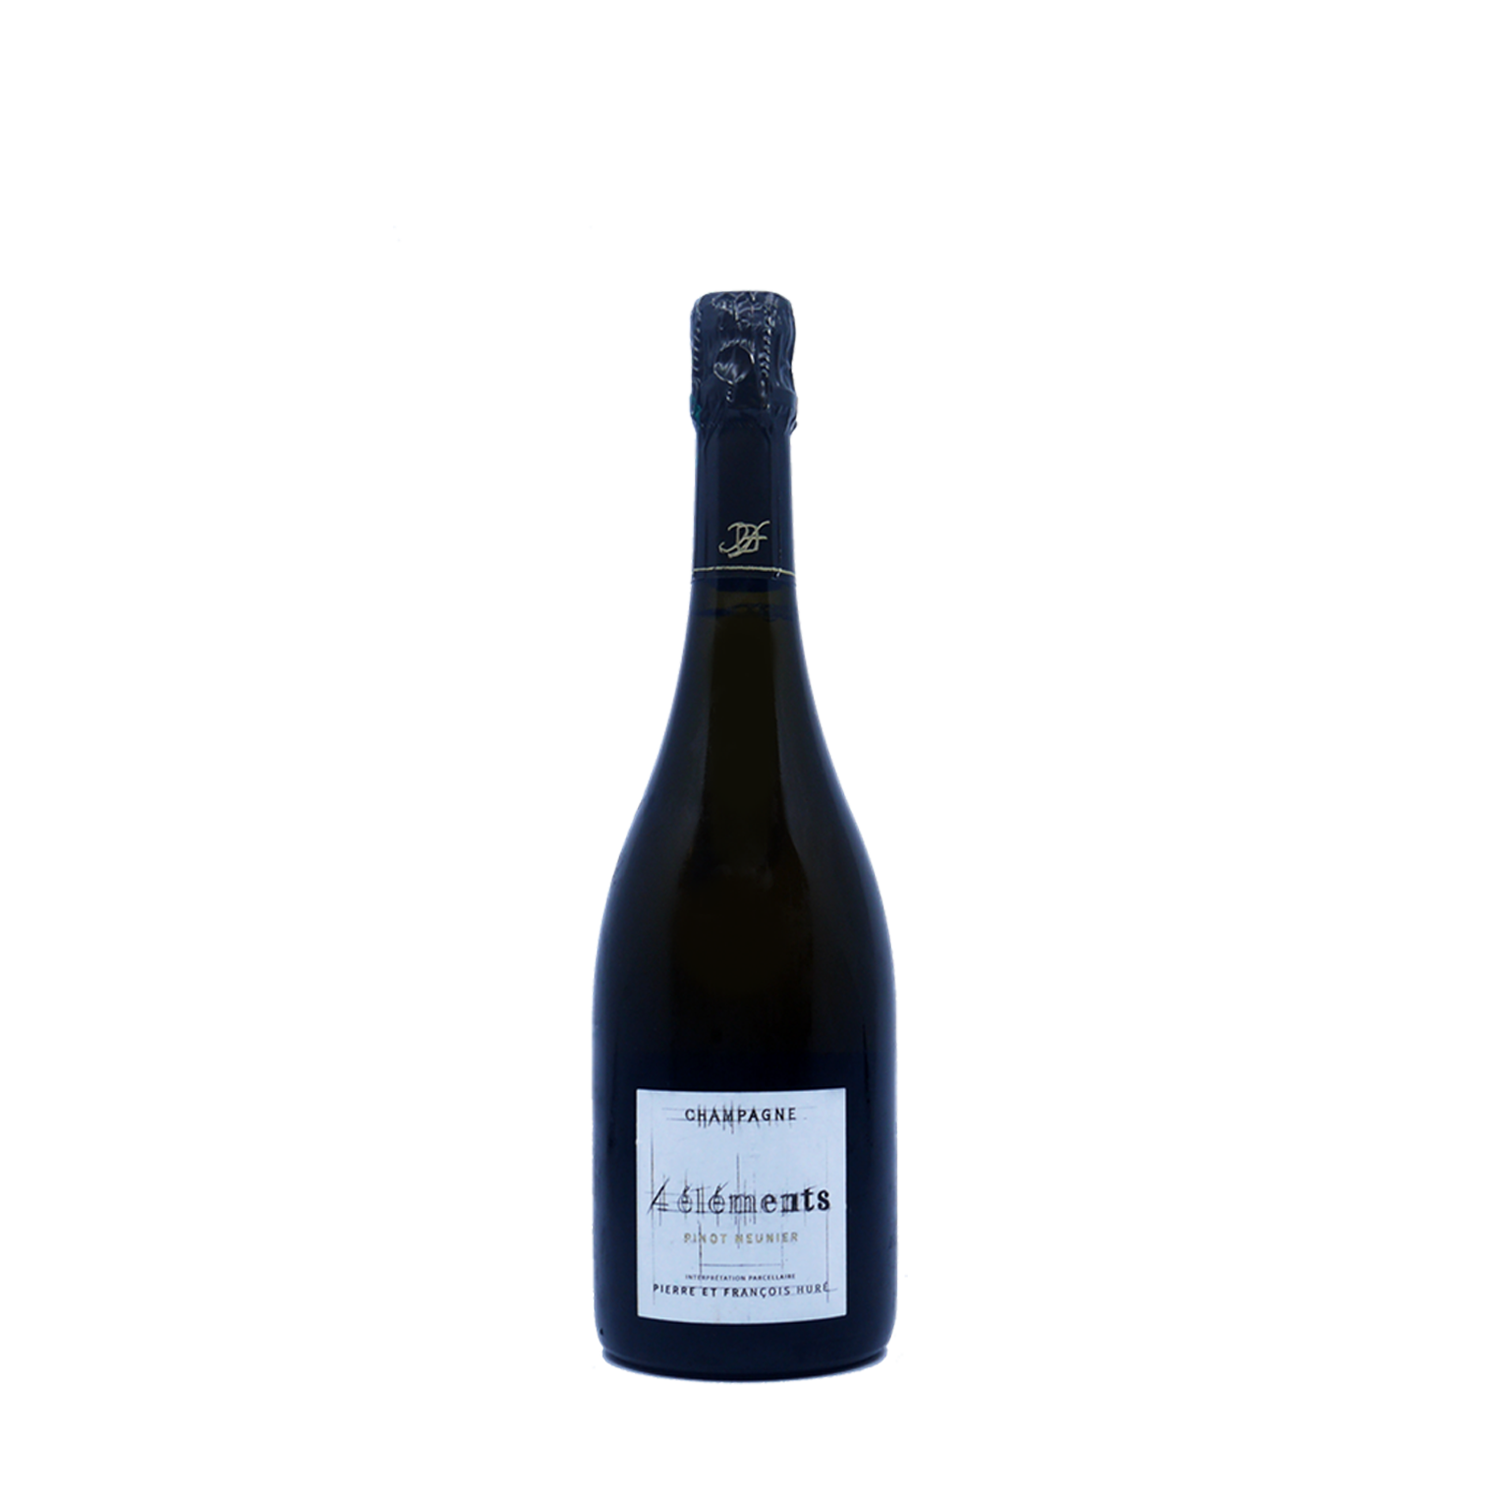 Champagne Brut 4 Elements Pinot Meunier Domaine Hure Freres 2015